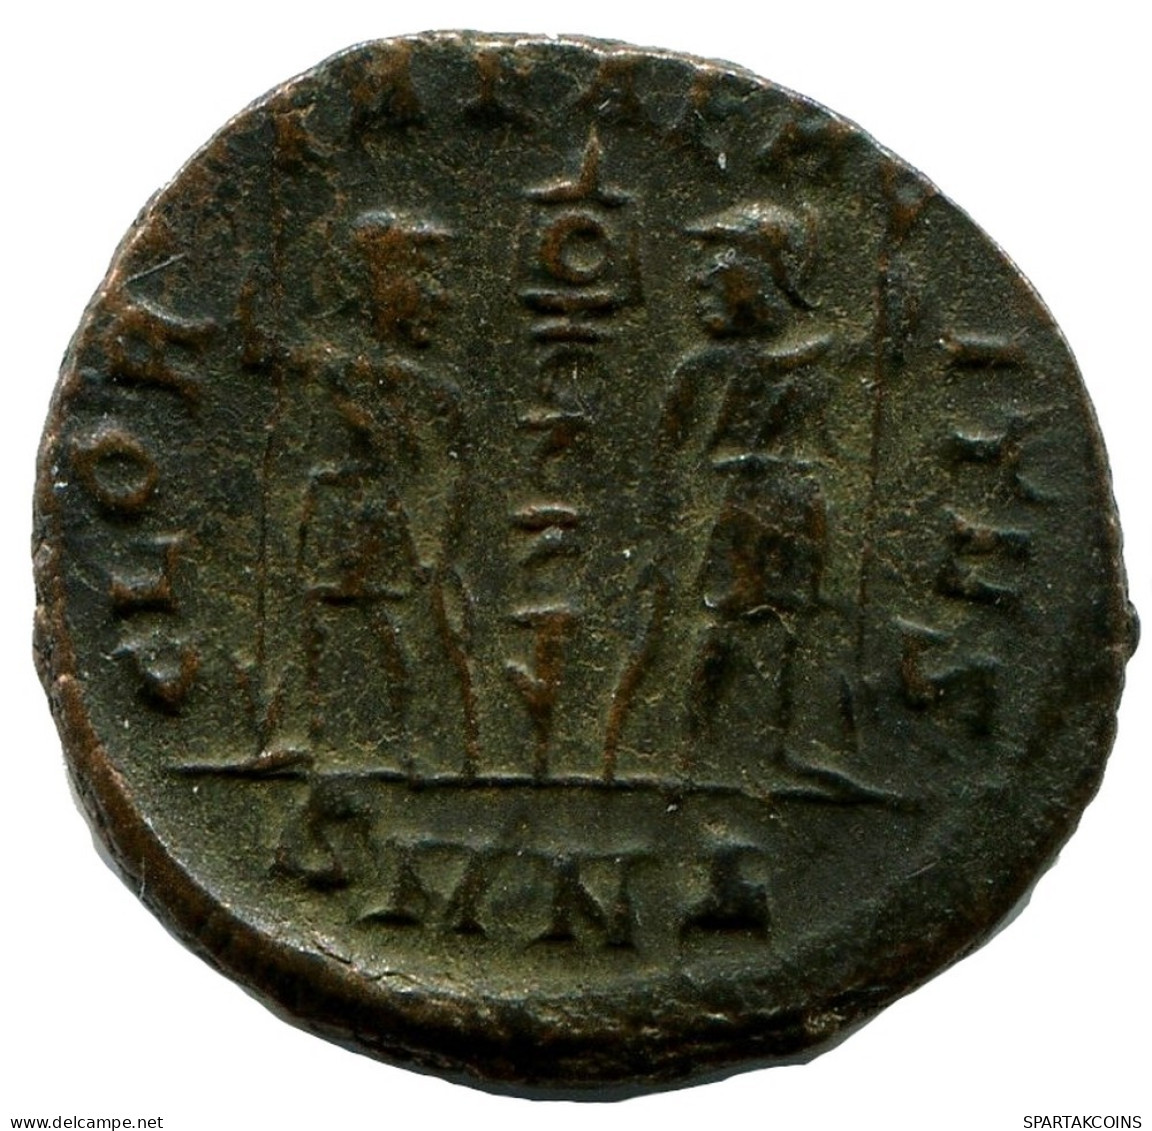 CONSTANTINE I MINTED IN NICOMEDIA FROM THE ROYAL ONTARIO MUSEUM #ANC10934.14.D.A - The Christian Empire (307 AD To 363 AD)